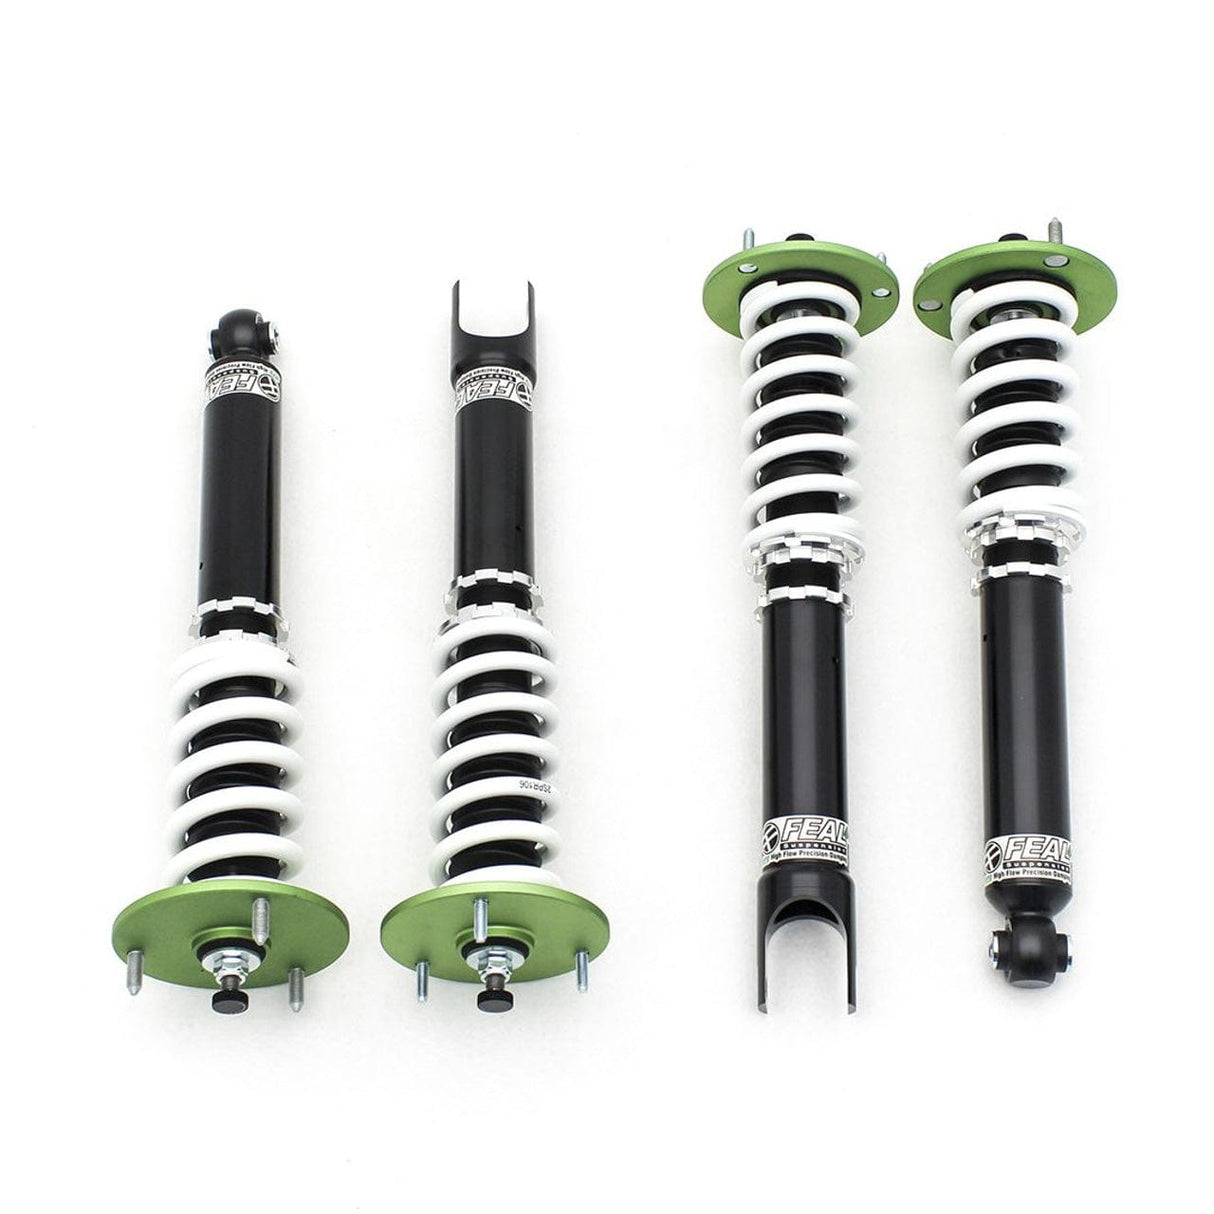 Feal 441 Coilovers - 1999-2001 Ford Mustang Cobra